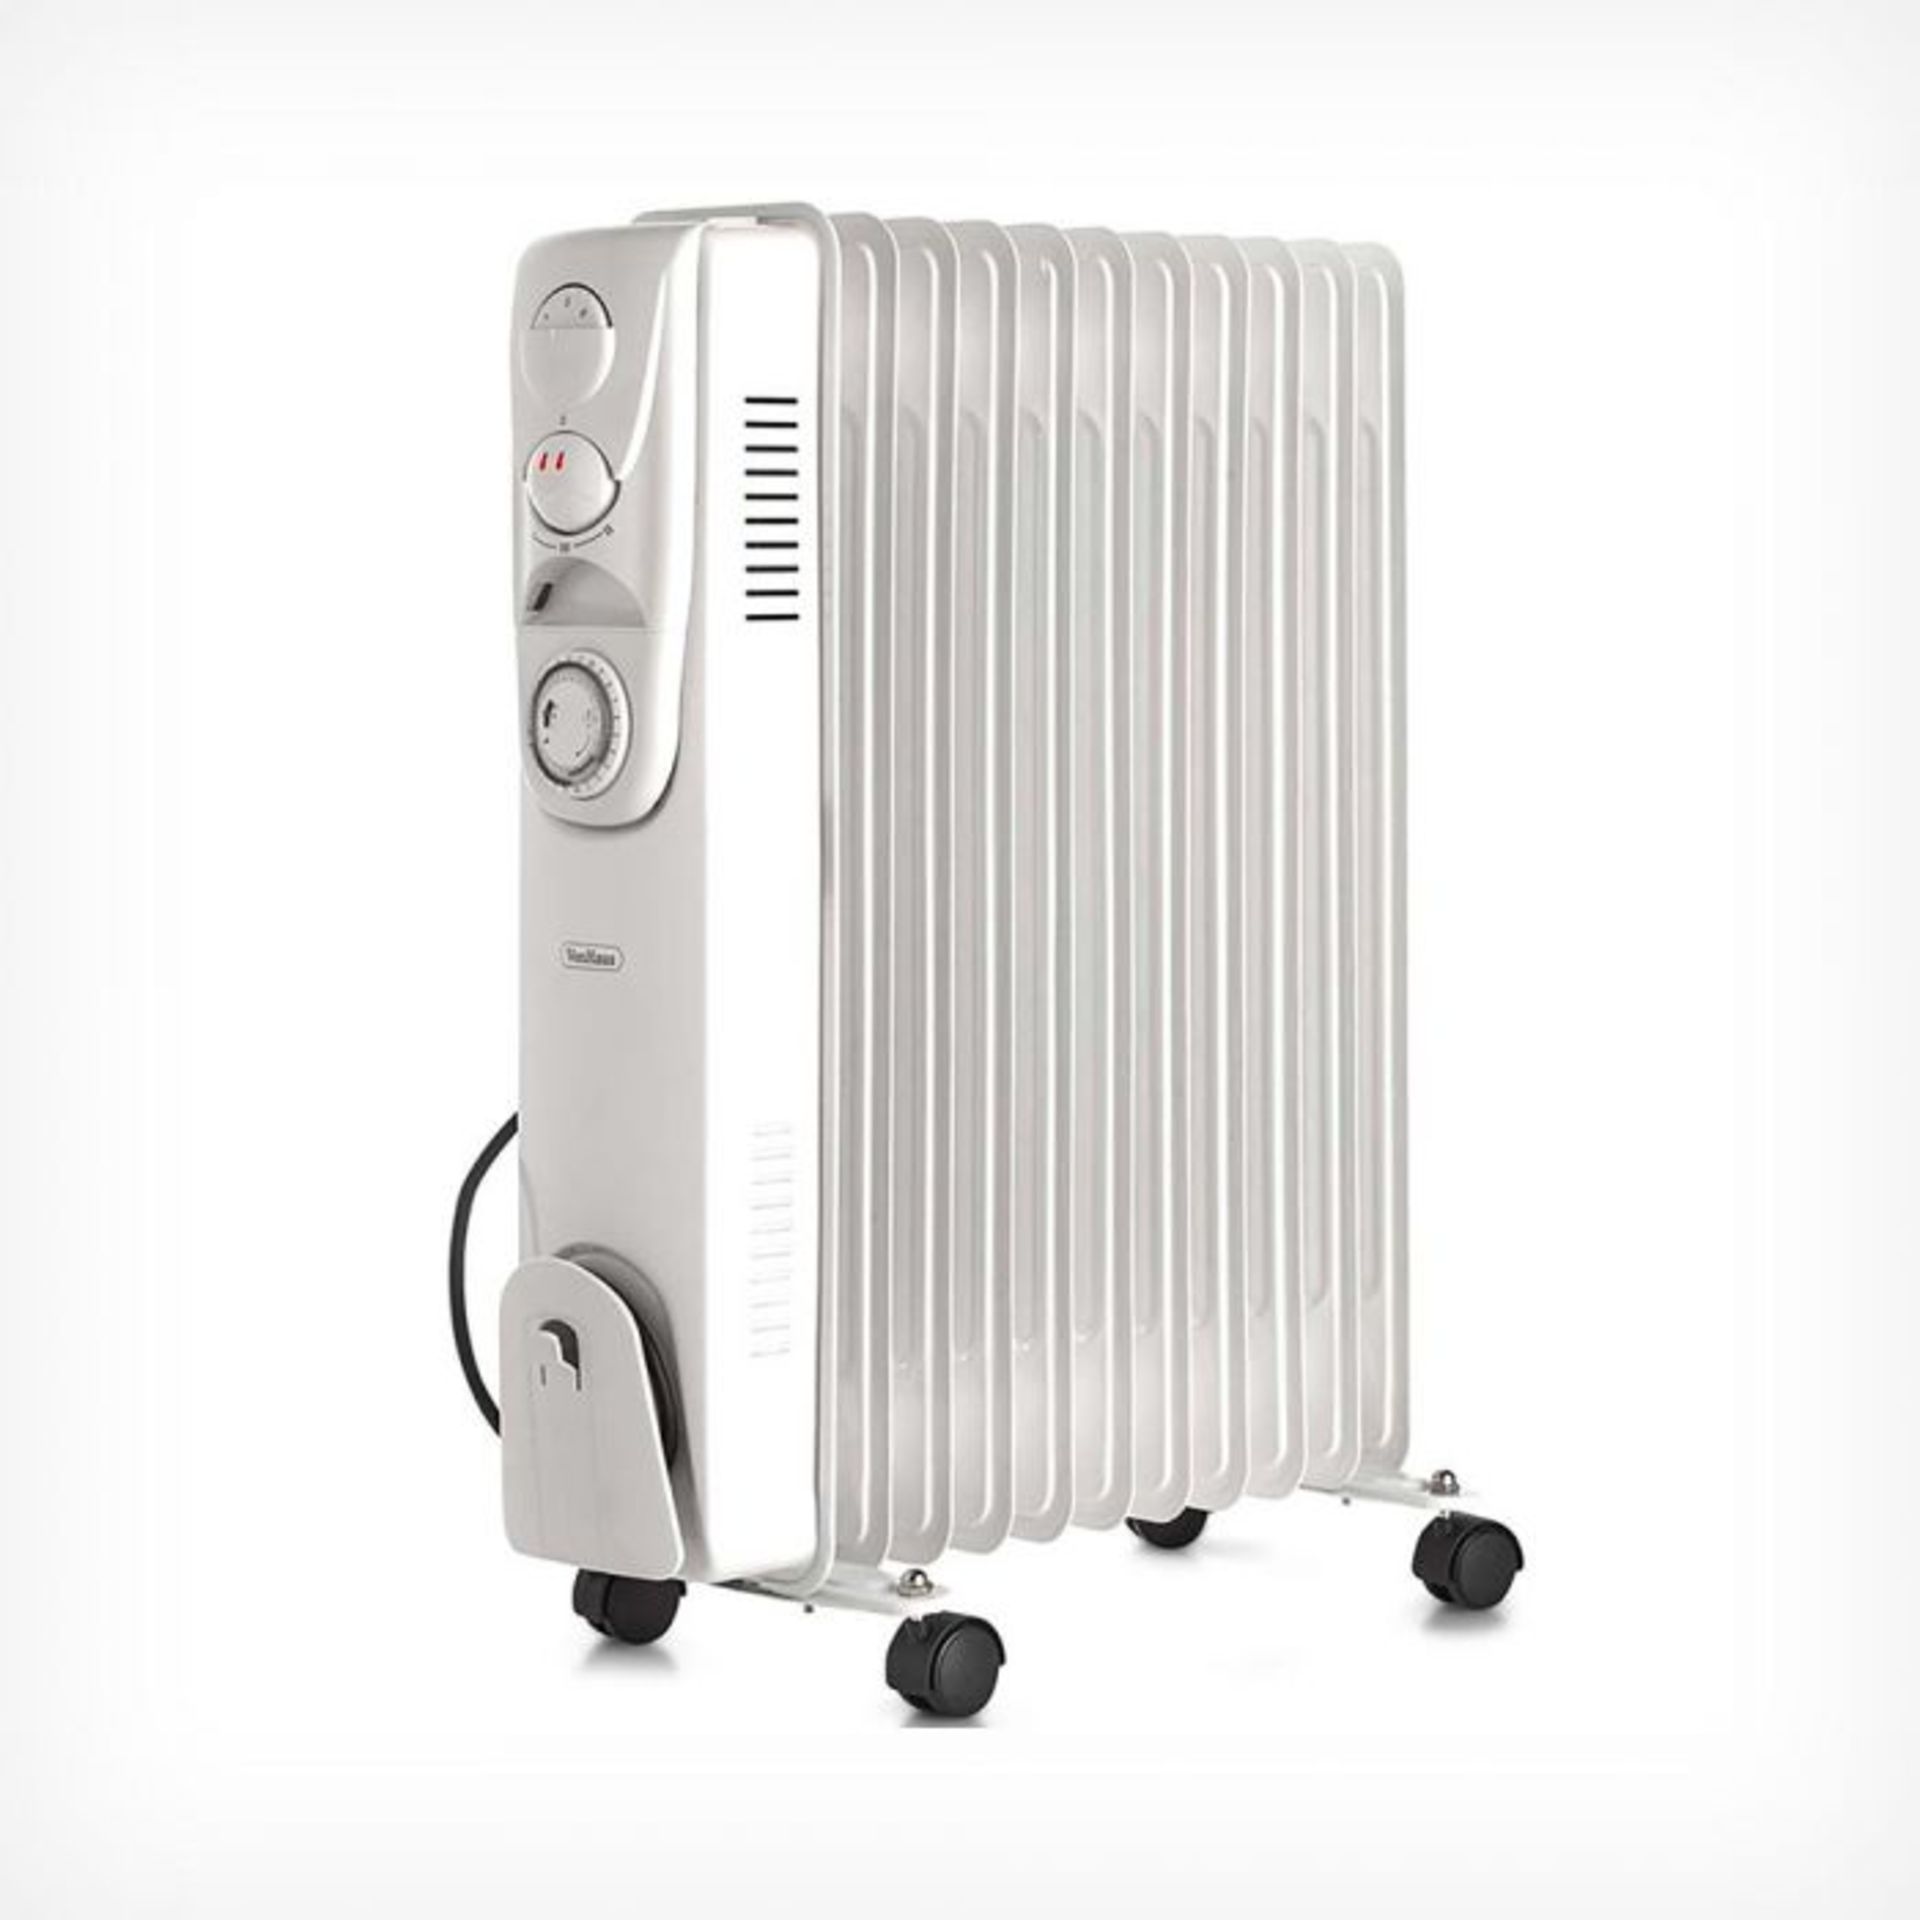 (S445) 11 Fin 2500W Oil Filled Radiator - White Suitable for areas up to 28 square metres 3 p... - Image 2 of 4